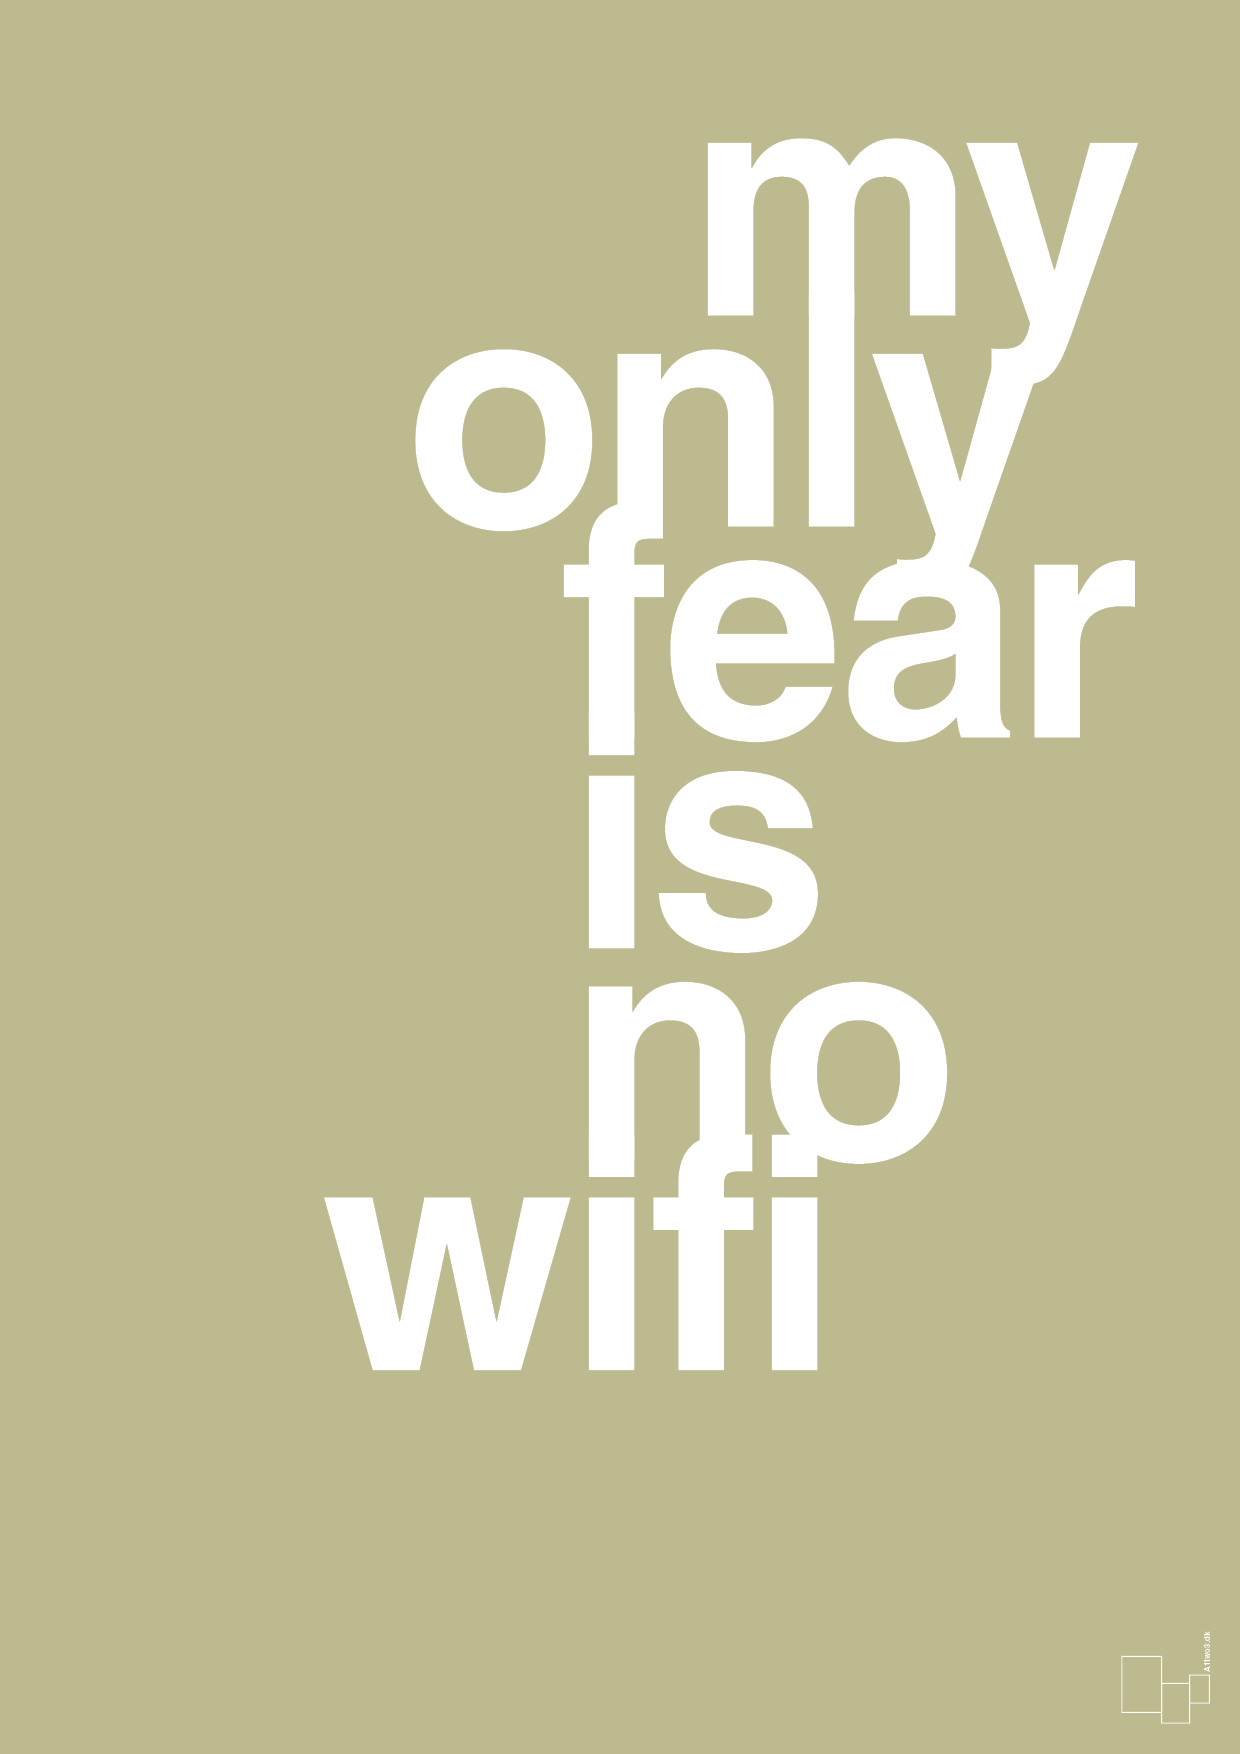 my only fear is no wifi - Plakat med Sport & Fritid i Back to Nature